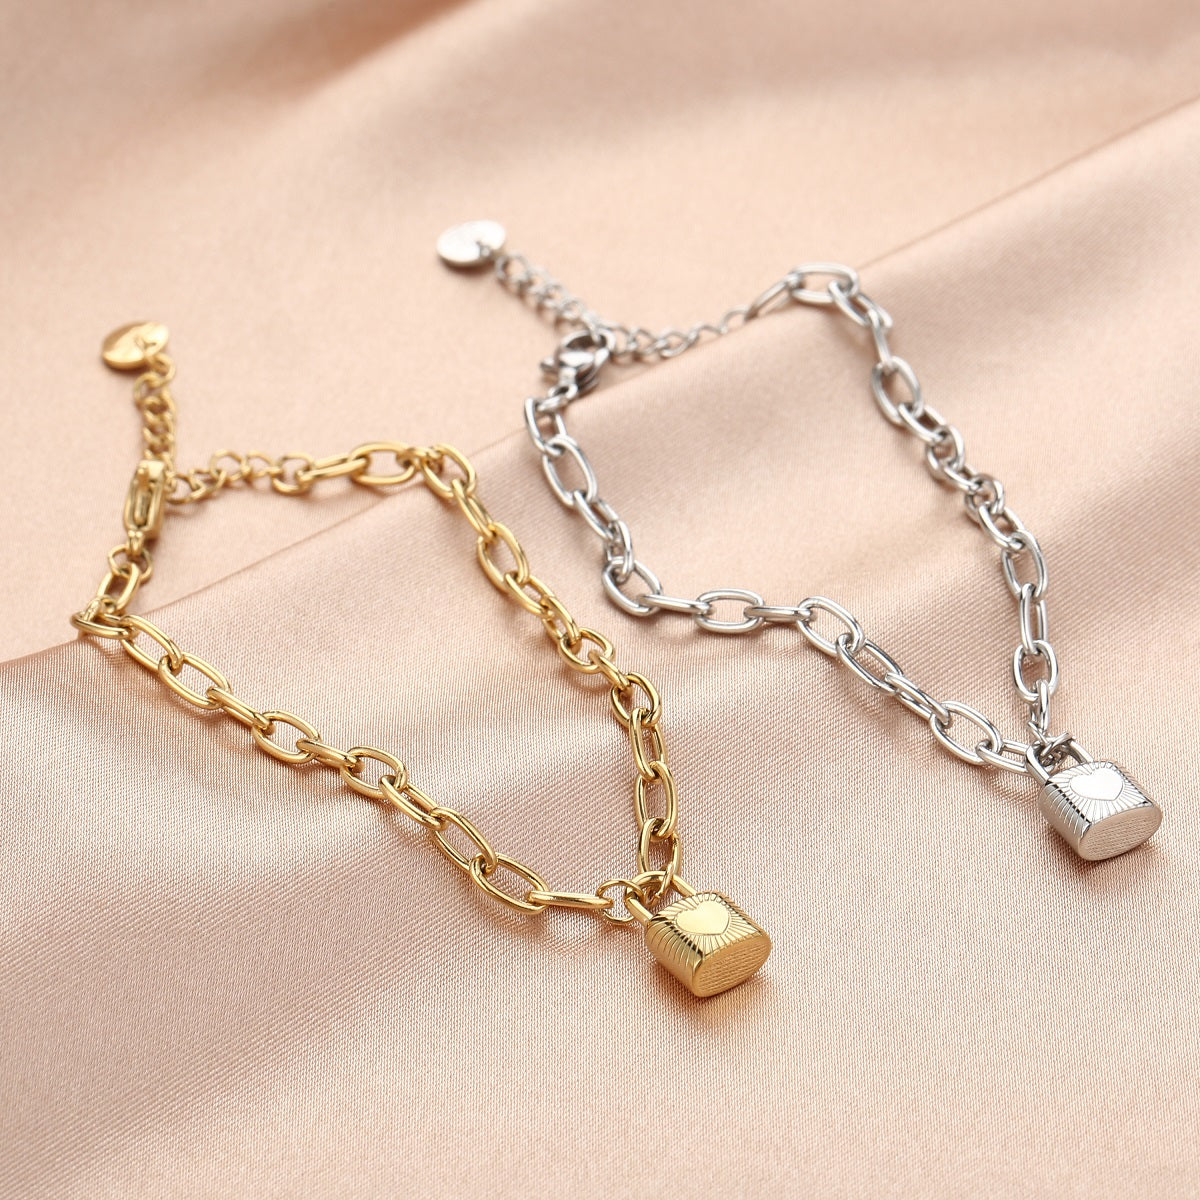 SALE - Armband Chain Lock of Light Zilver